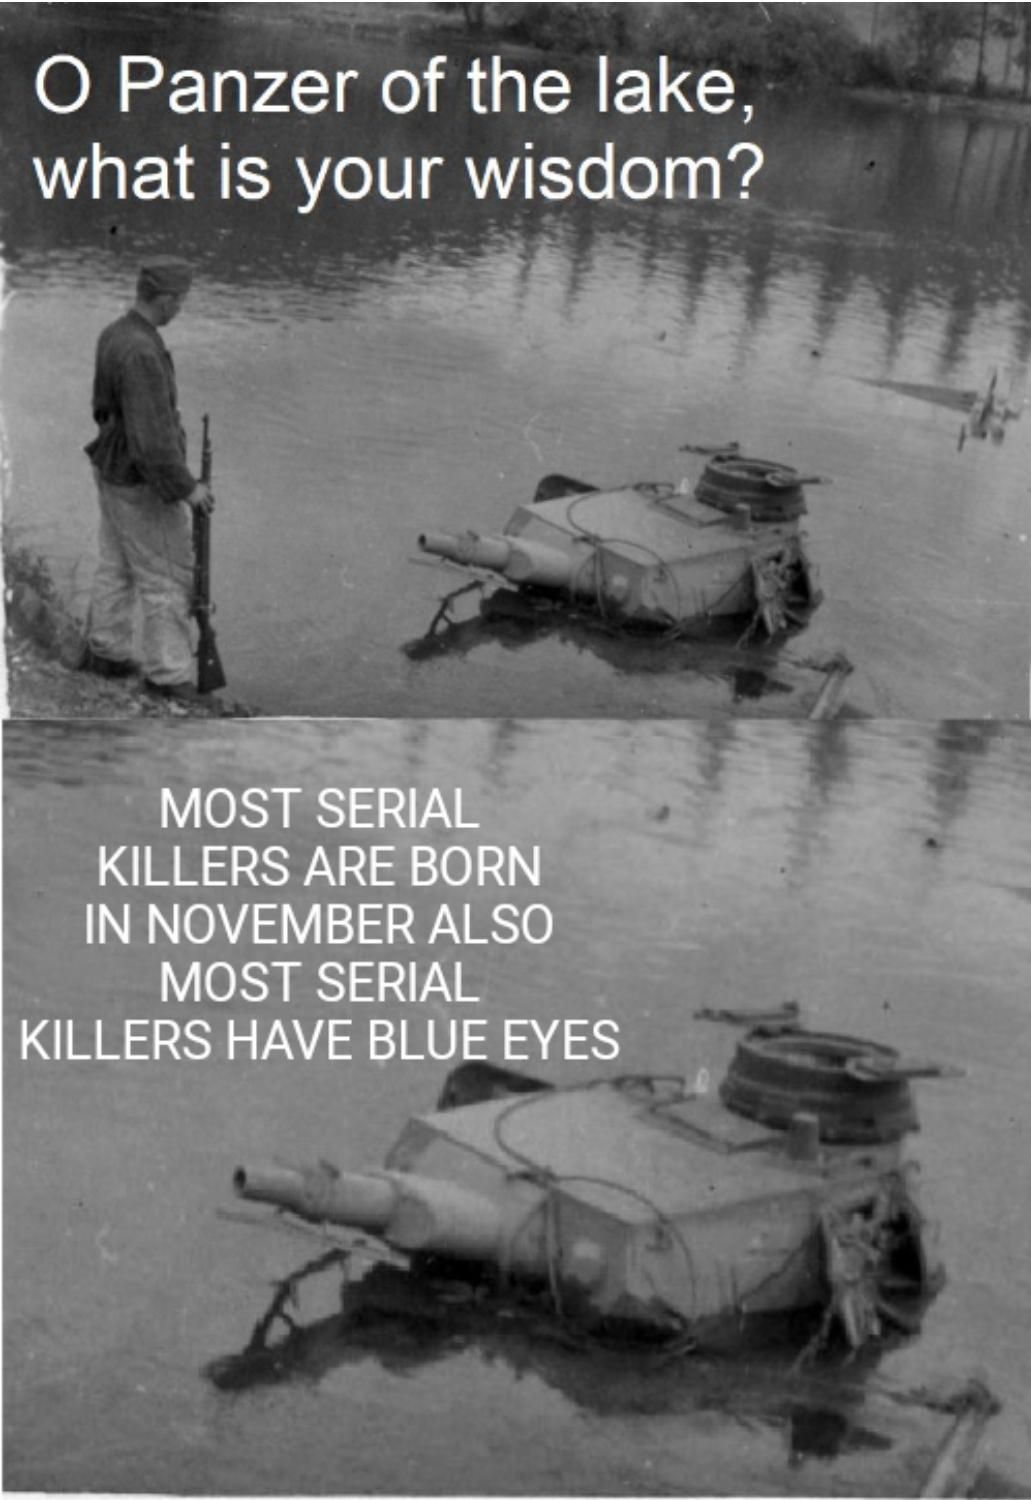 Wisdom about serial killers